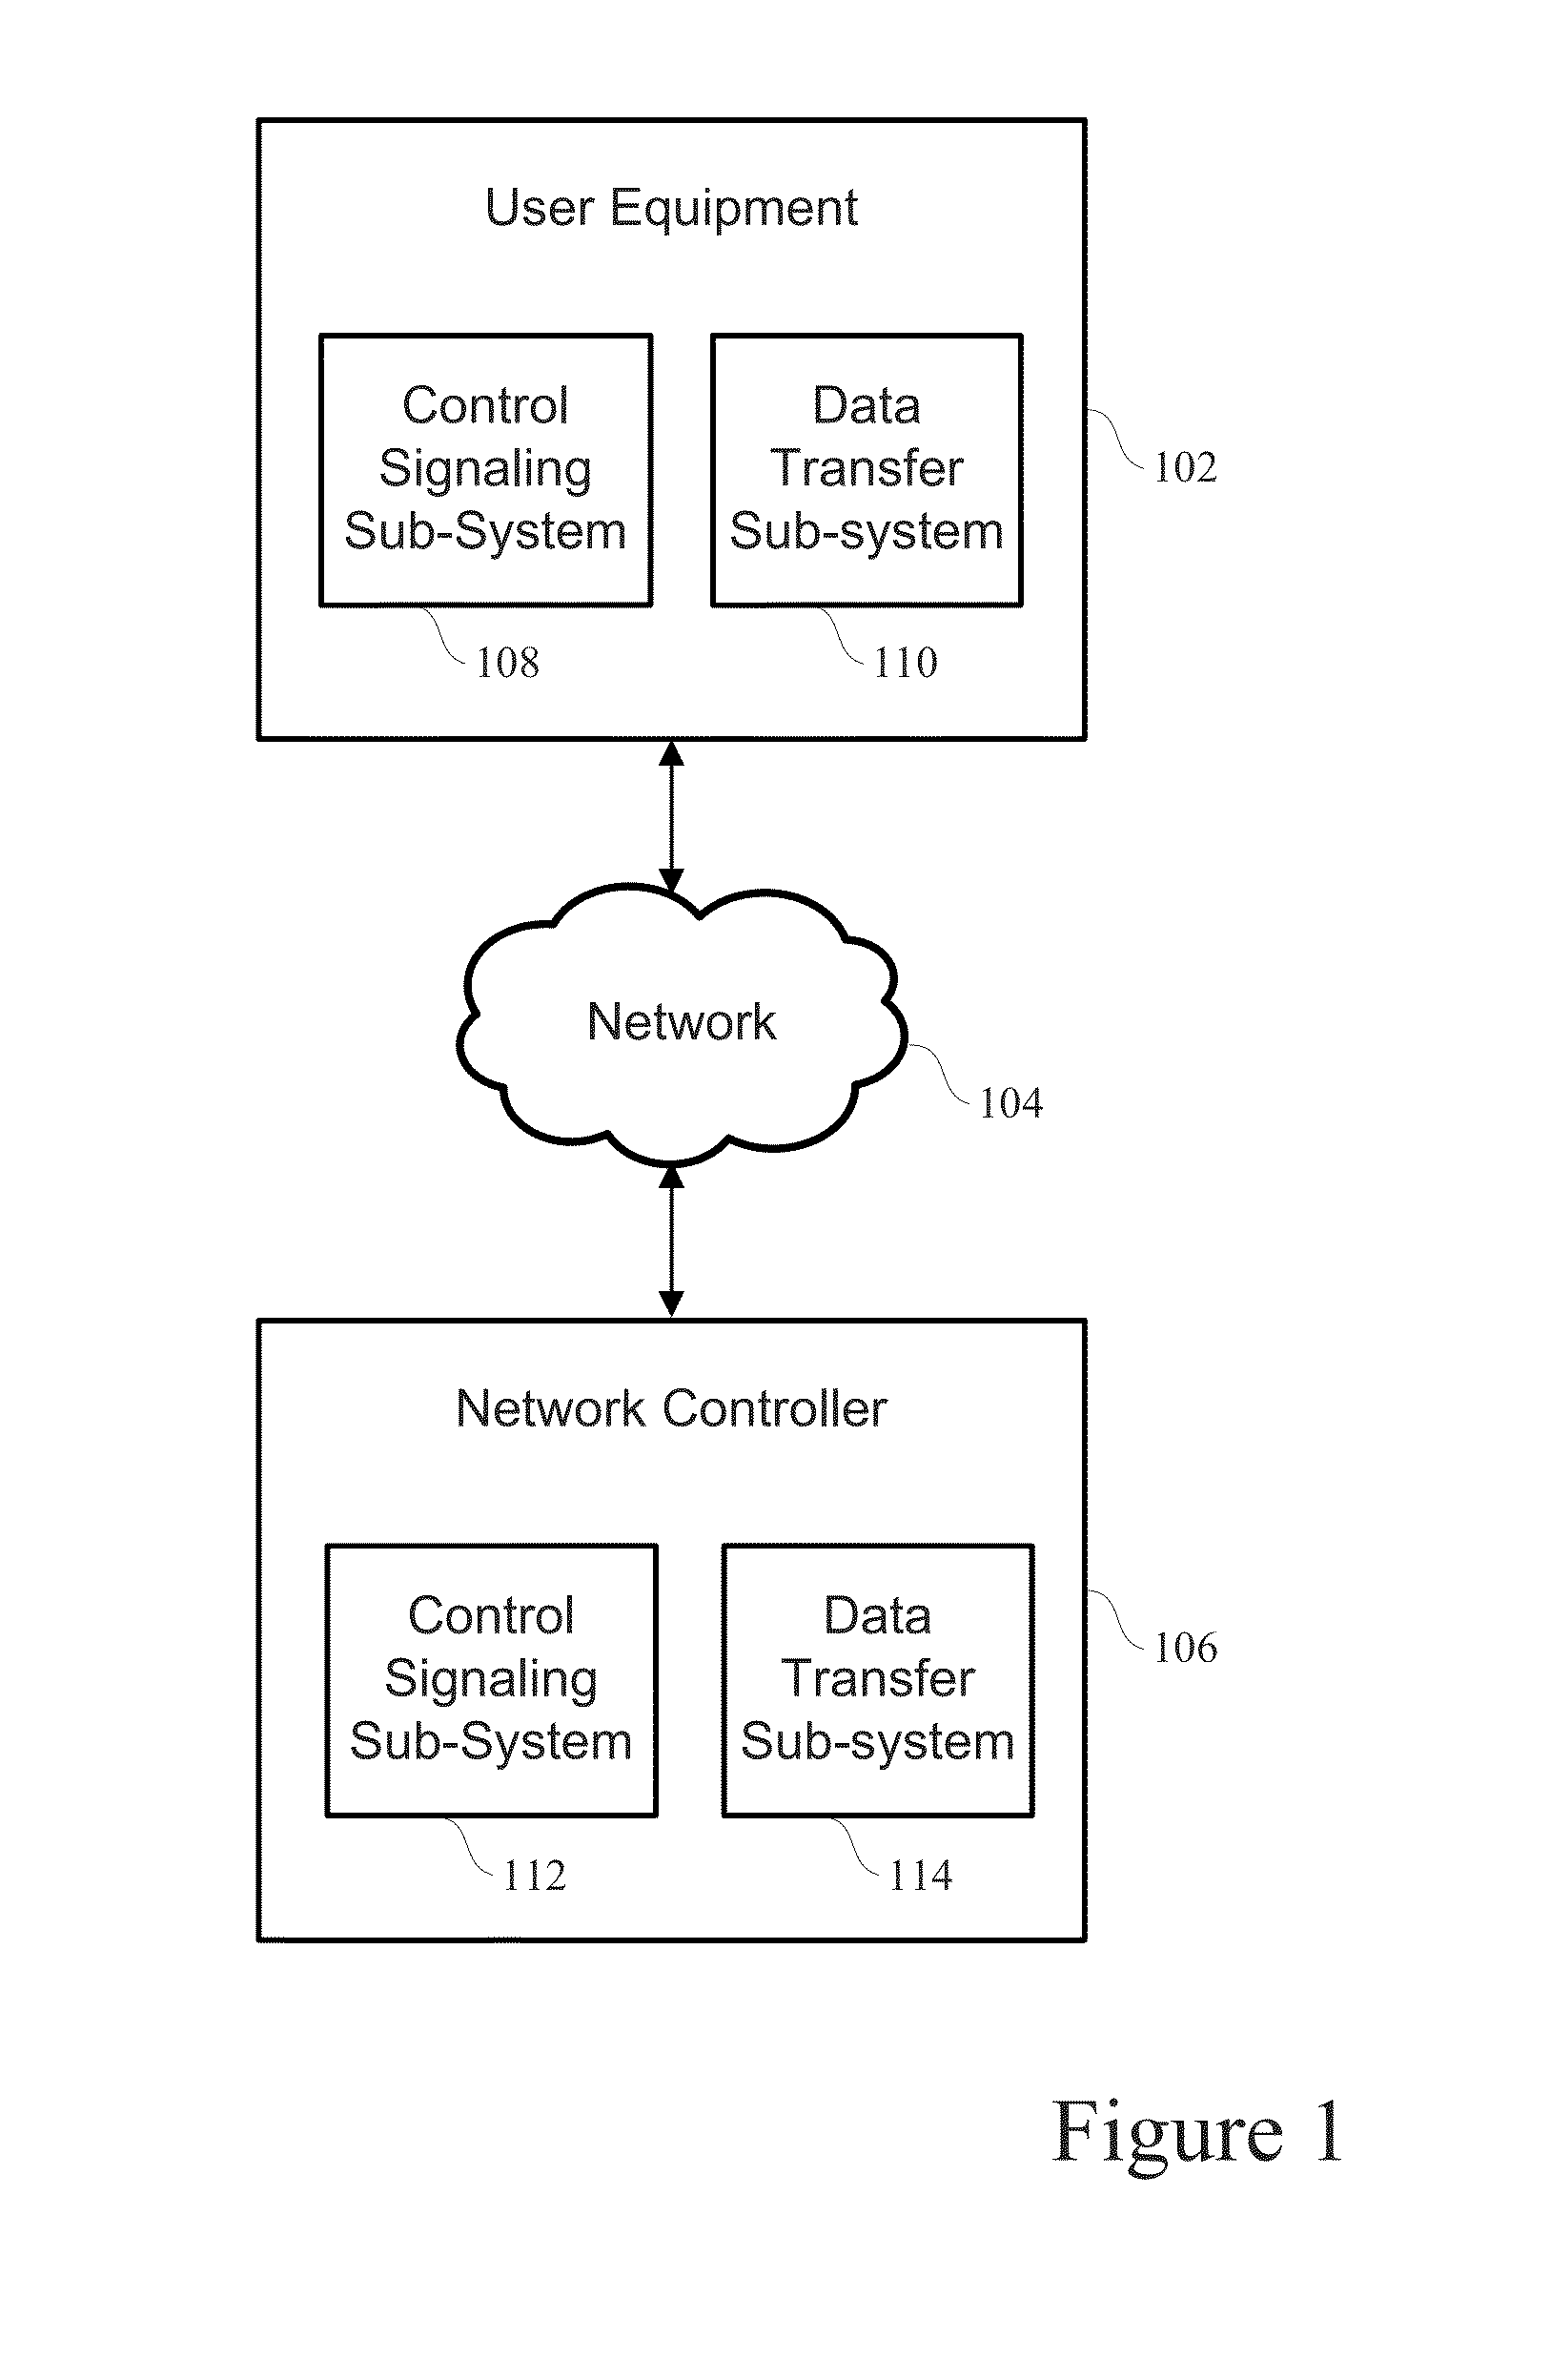 Self-Contained Data Transfer Channel